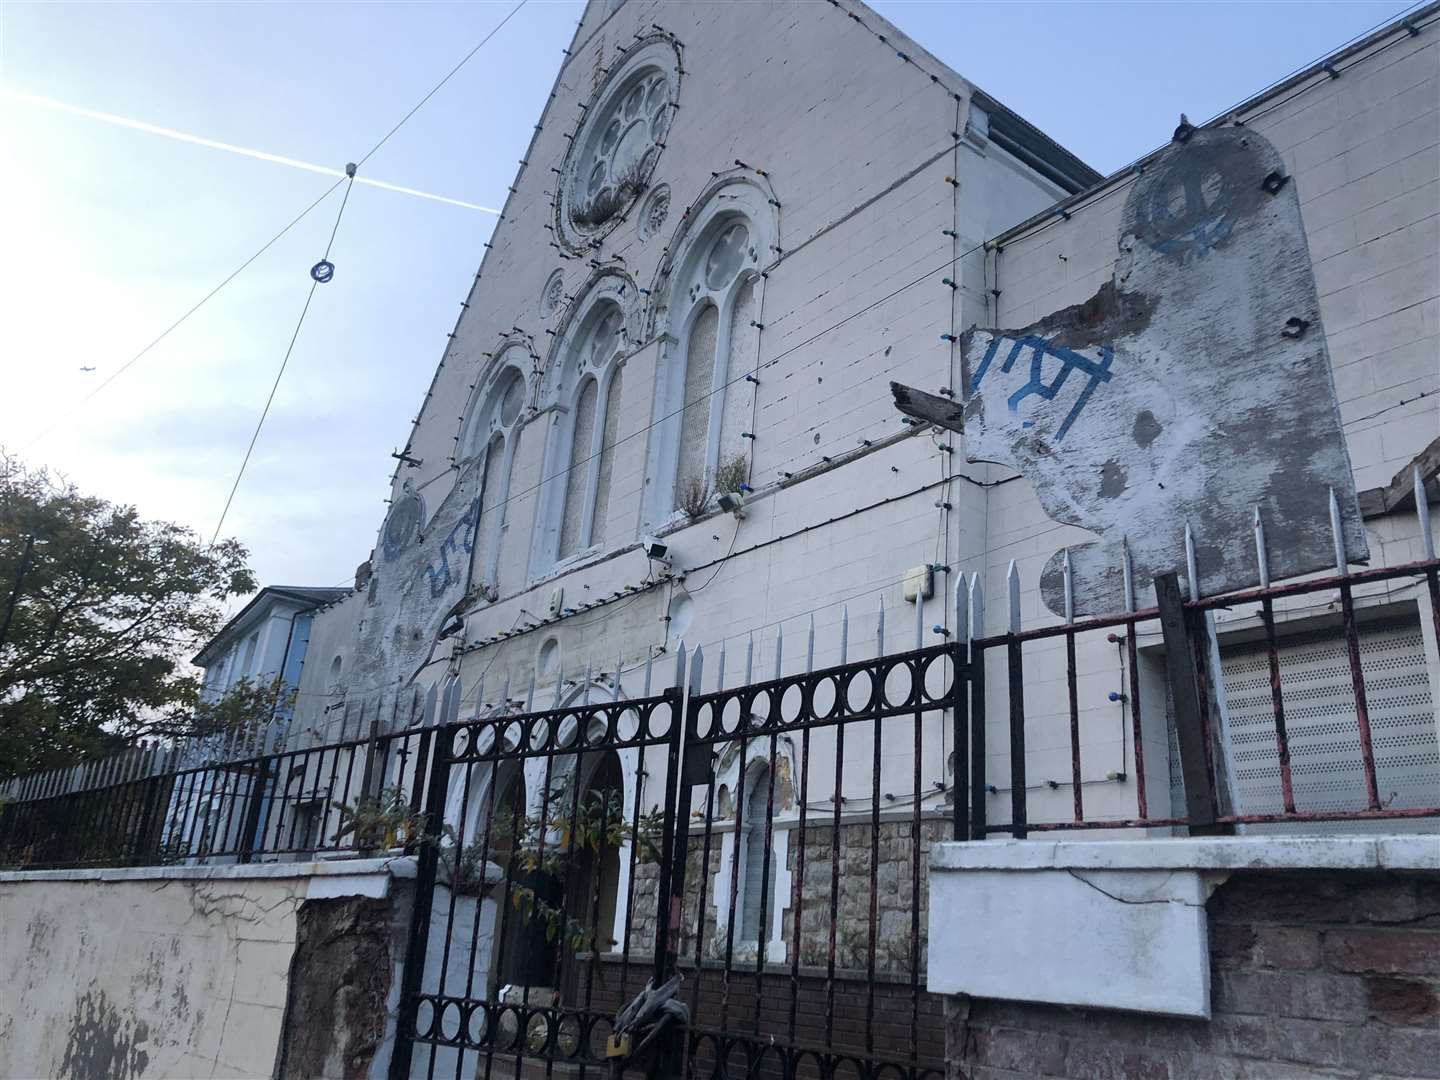 The former Gurdwara has been vacant since 2010